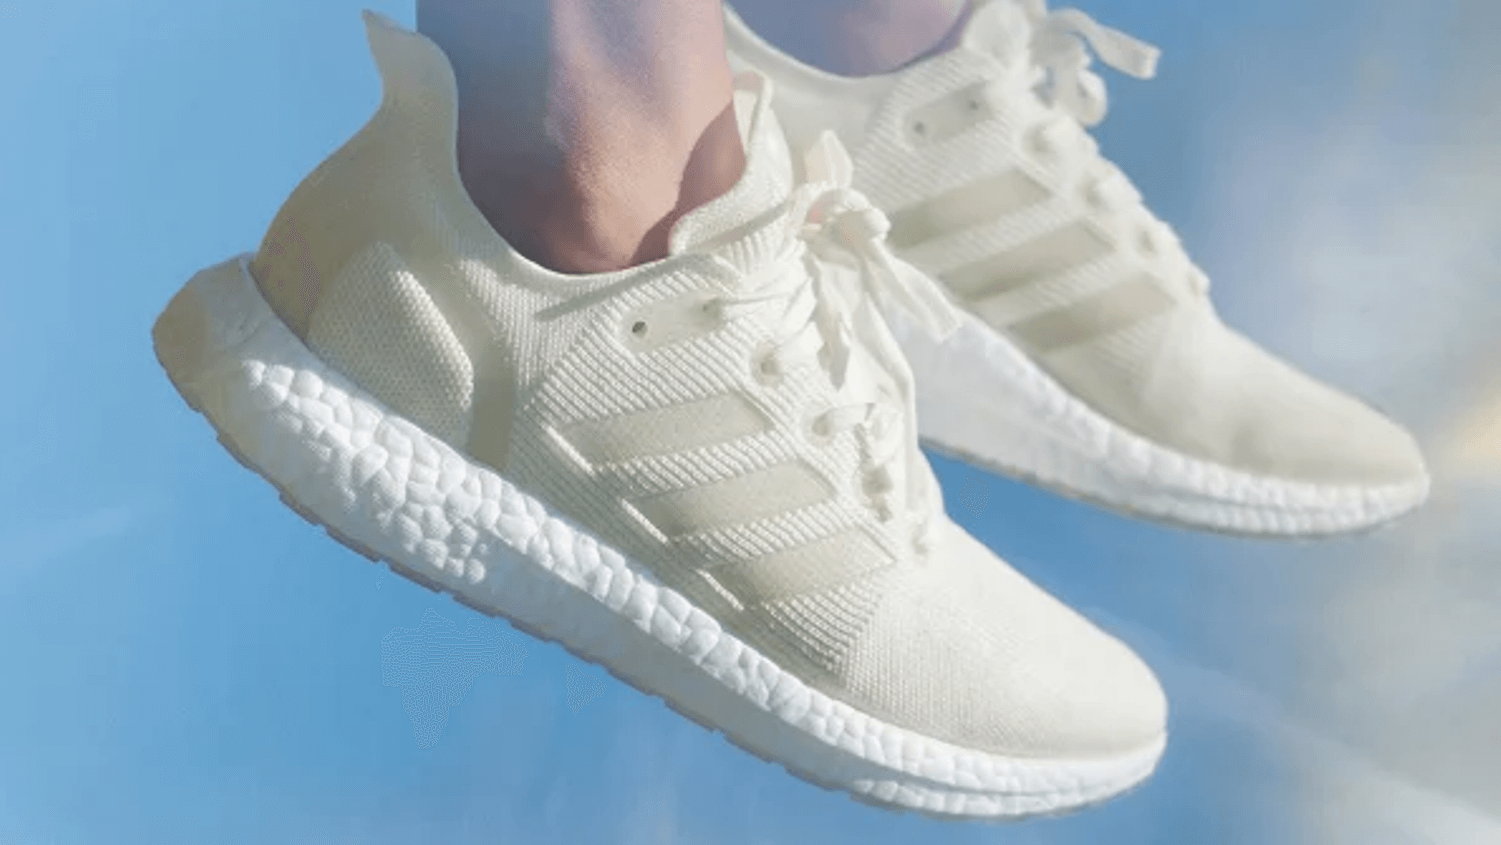 Adidas and Launch the 'World's Most Sustainable Shoe'